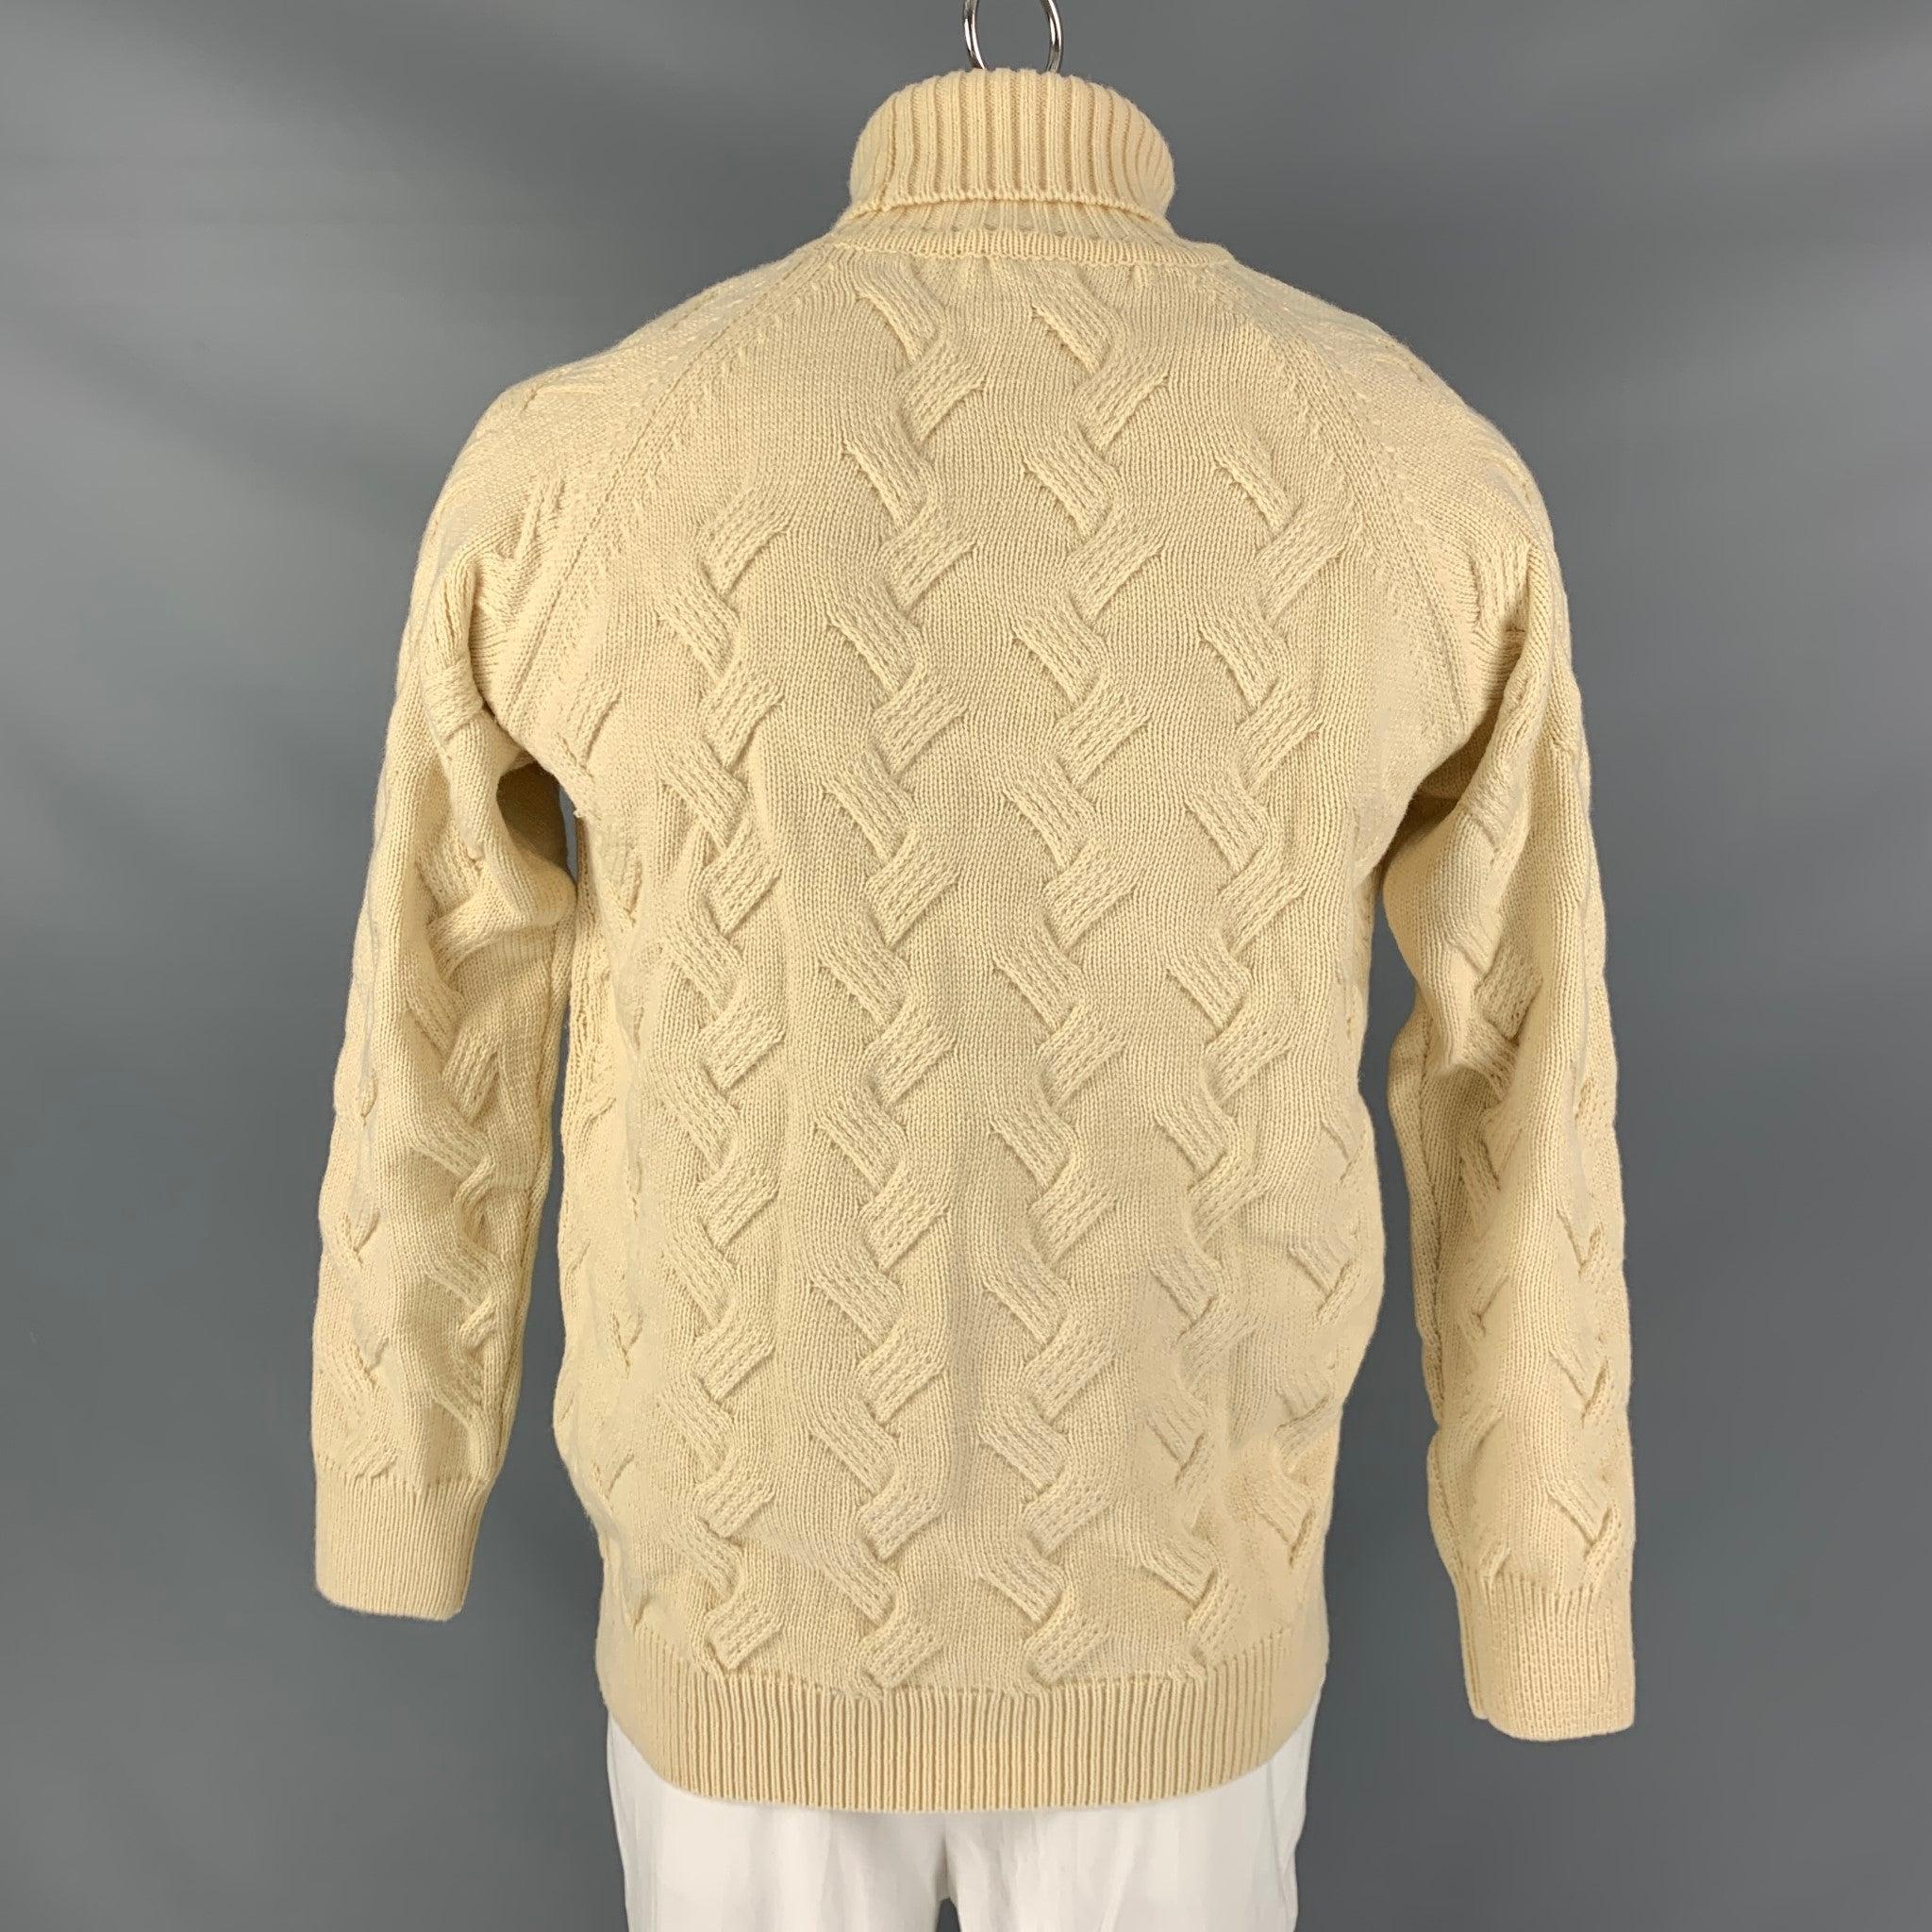 KITON Size L Beige Knit Cotton Turtleneck Sweater In Excellent Condition For Sale In San Francisco, CA